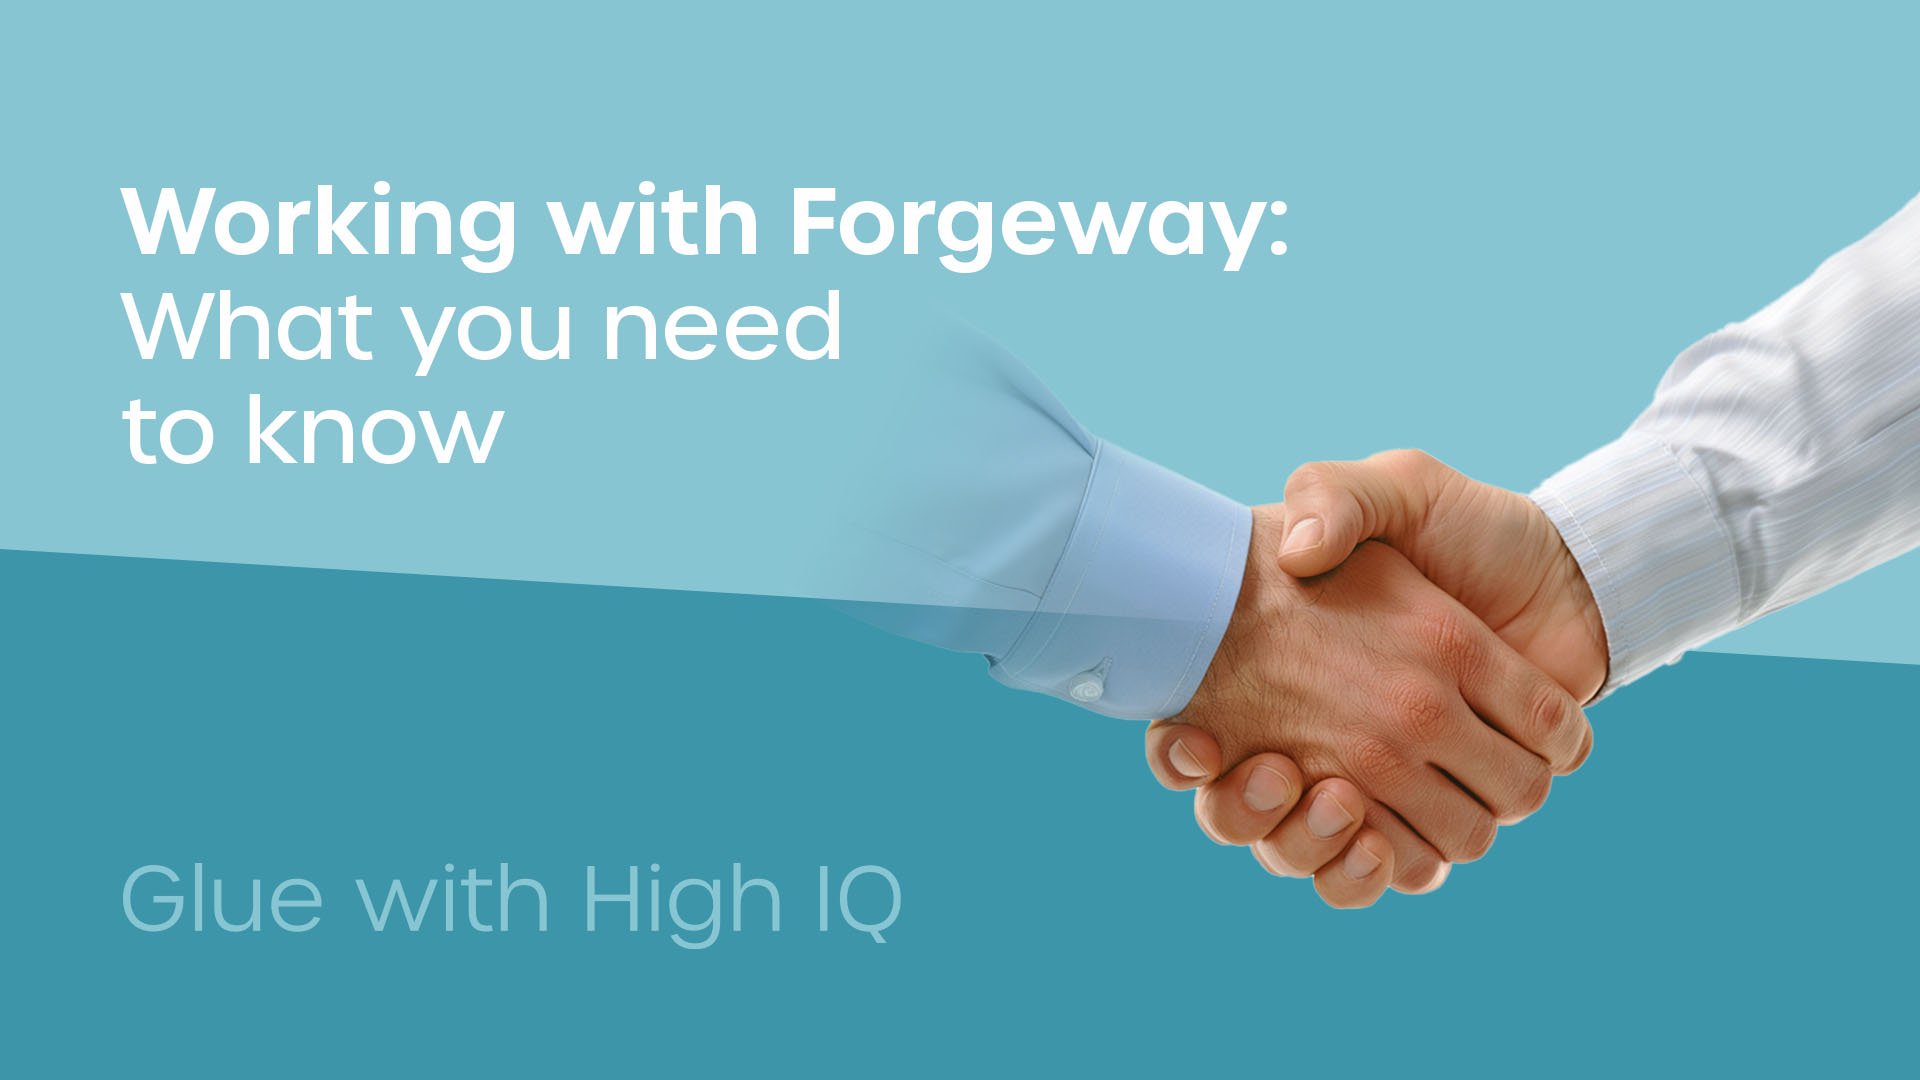 Working with Forgeway